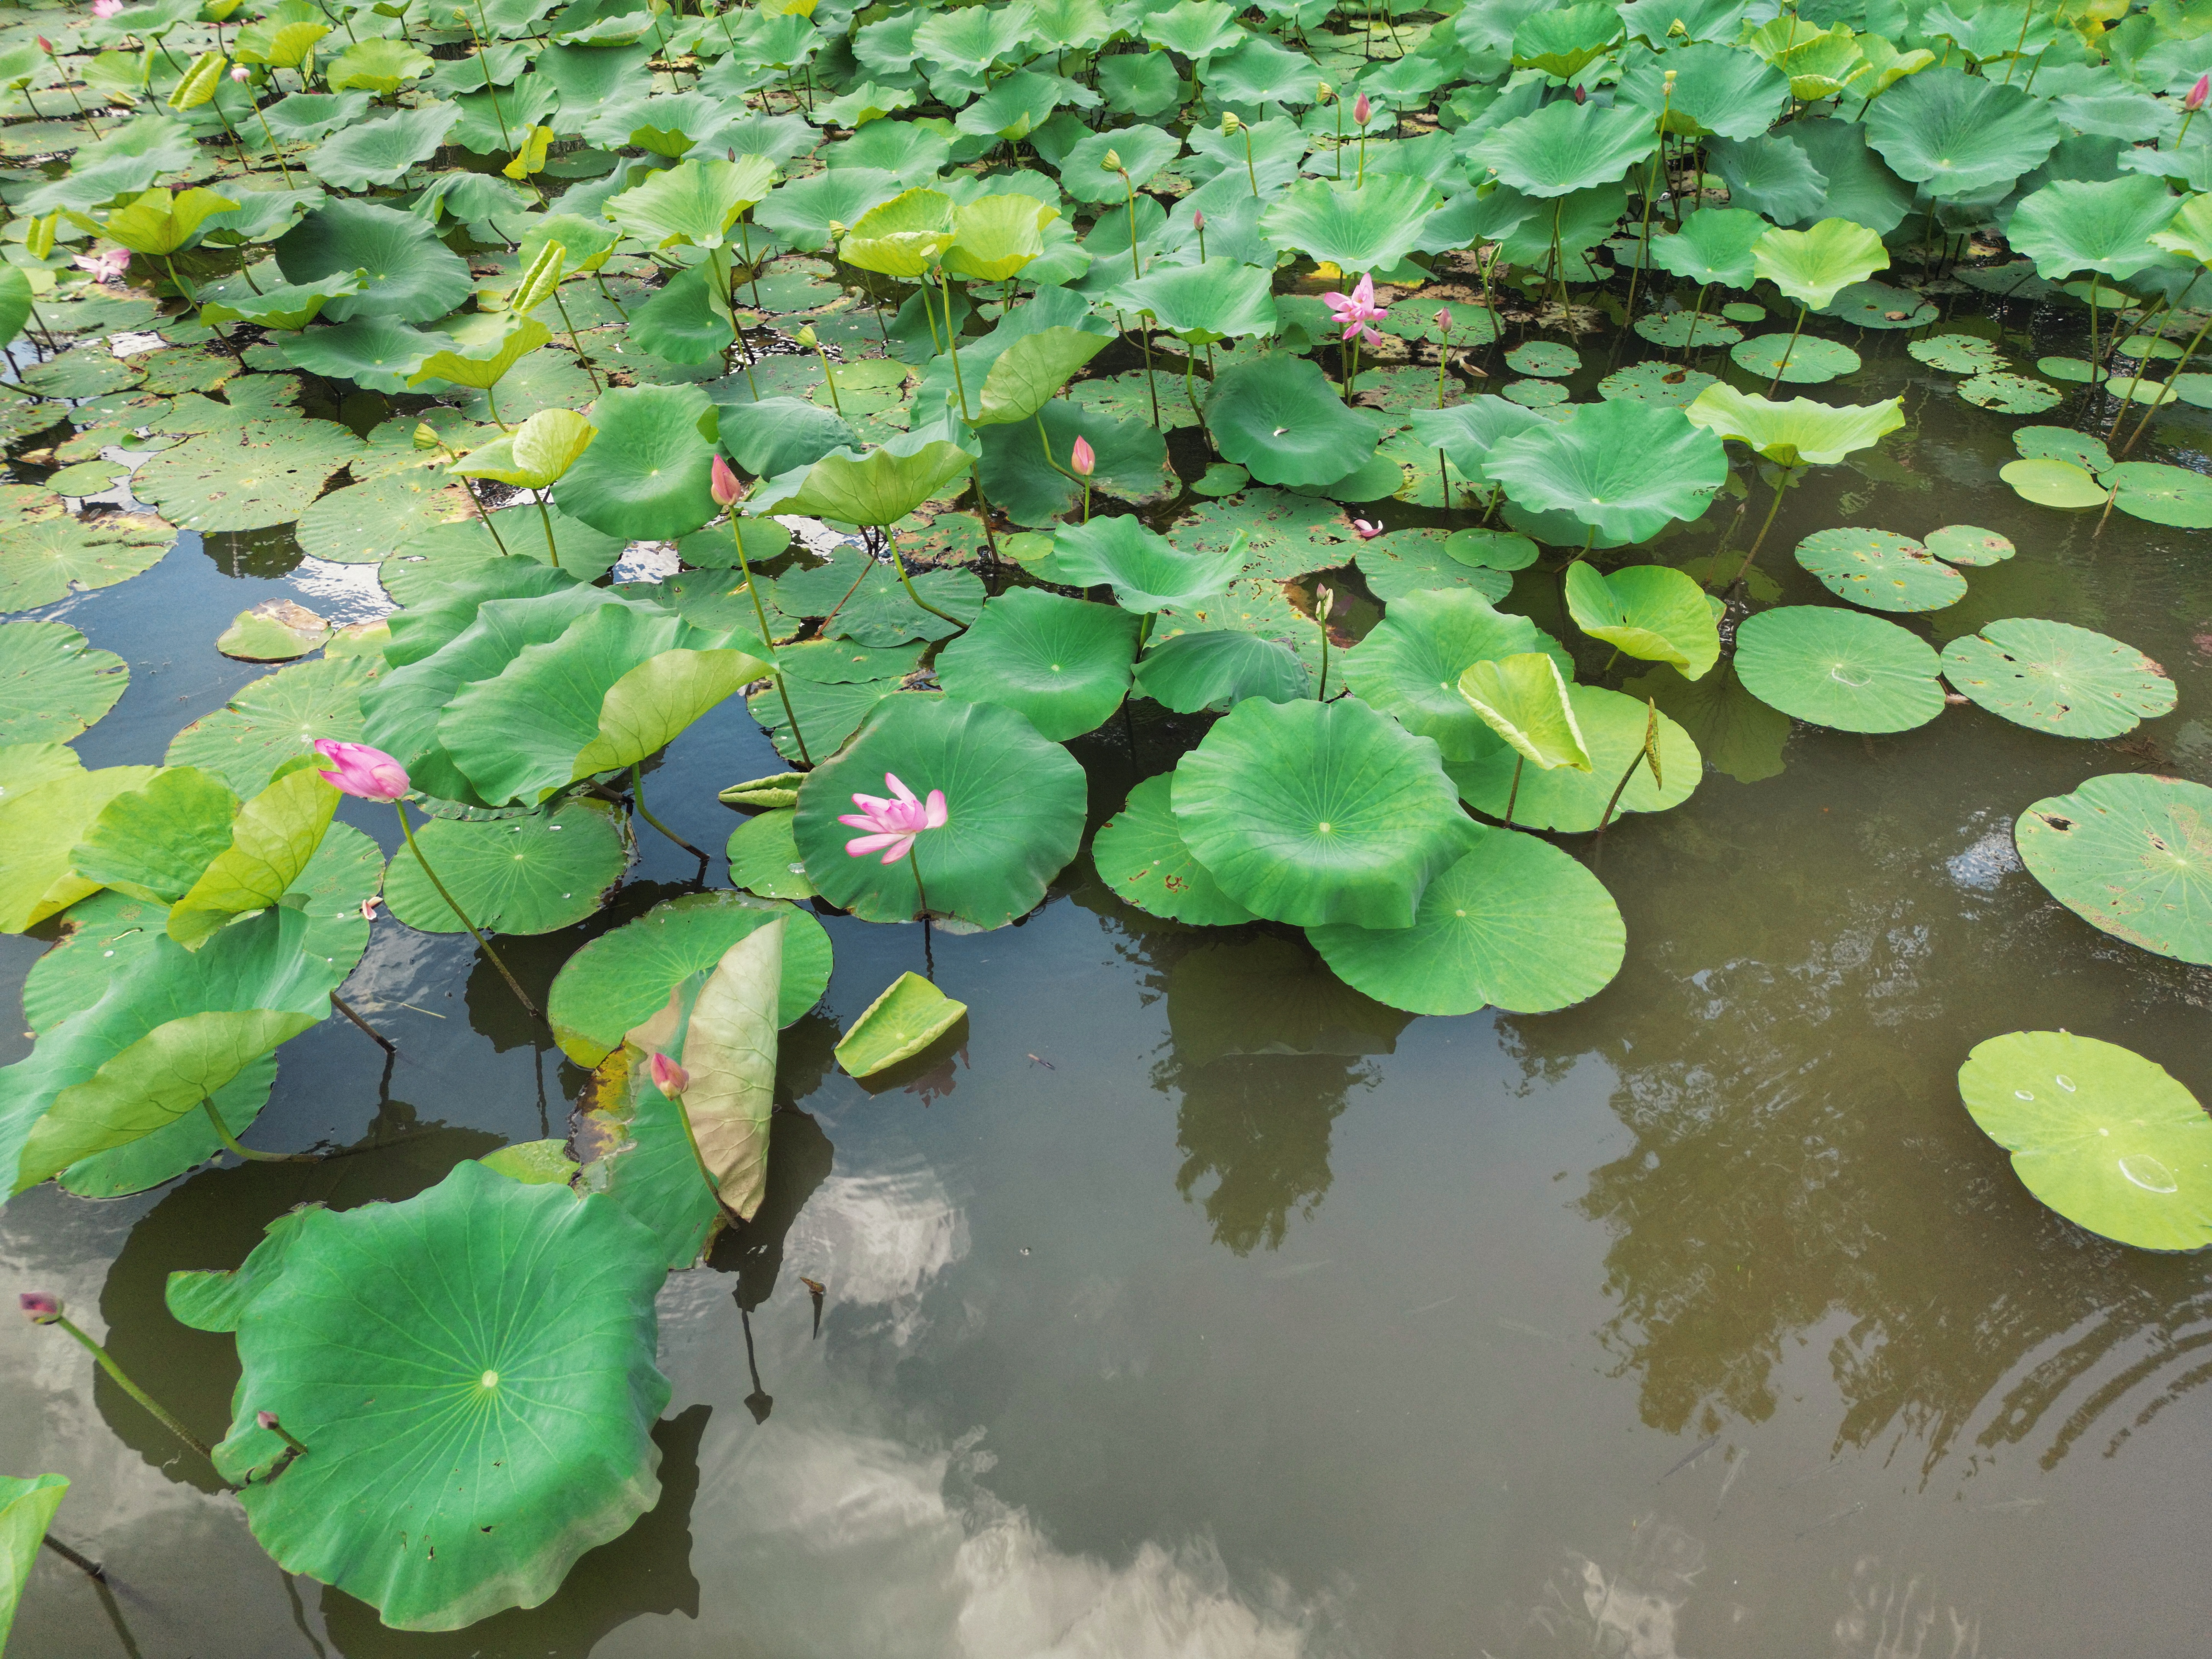 Landscape City Drone Photo Shanghai Lotus Water Water Lilies Reflection Flowers 5773x4330